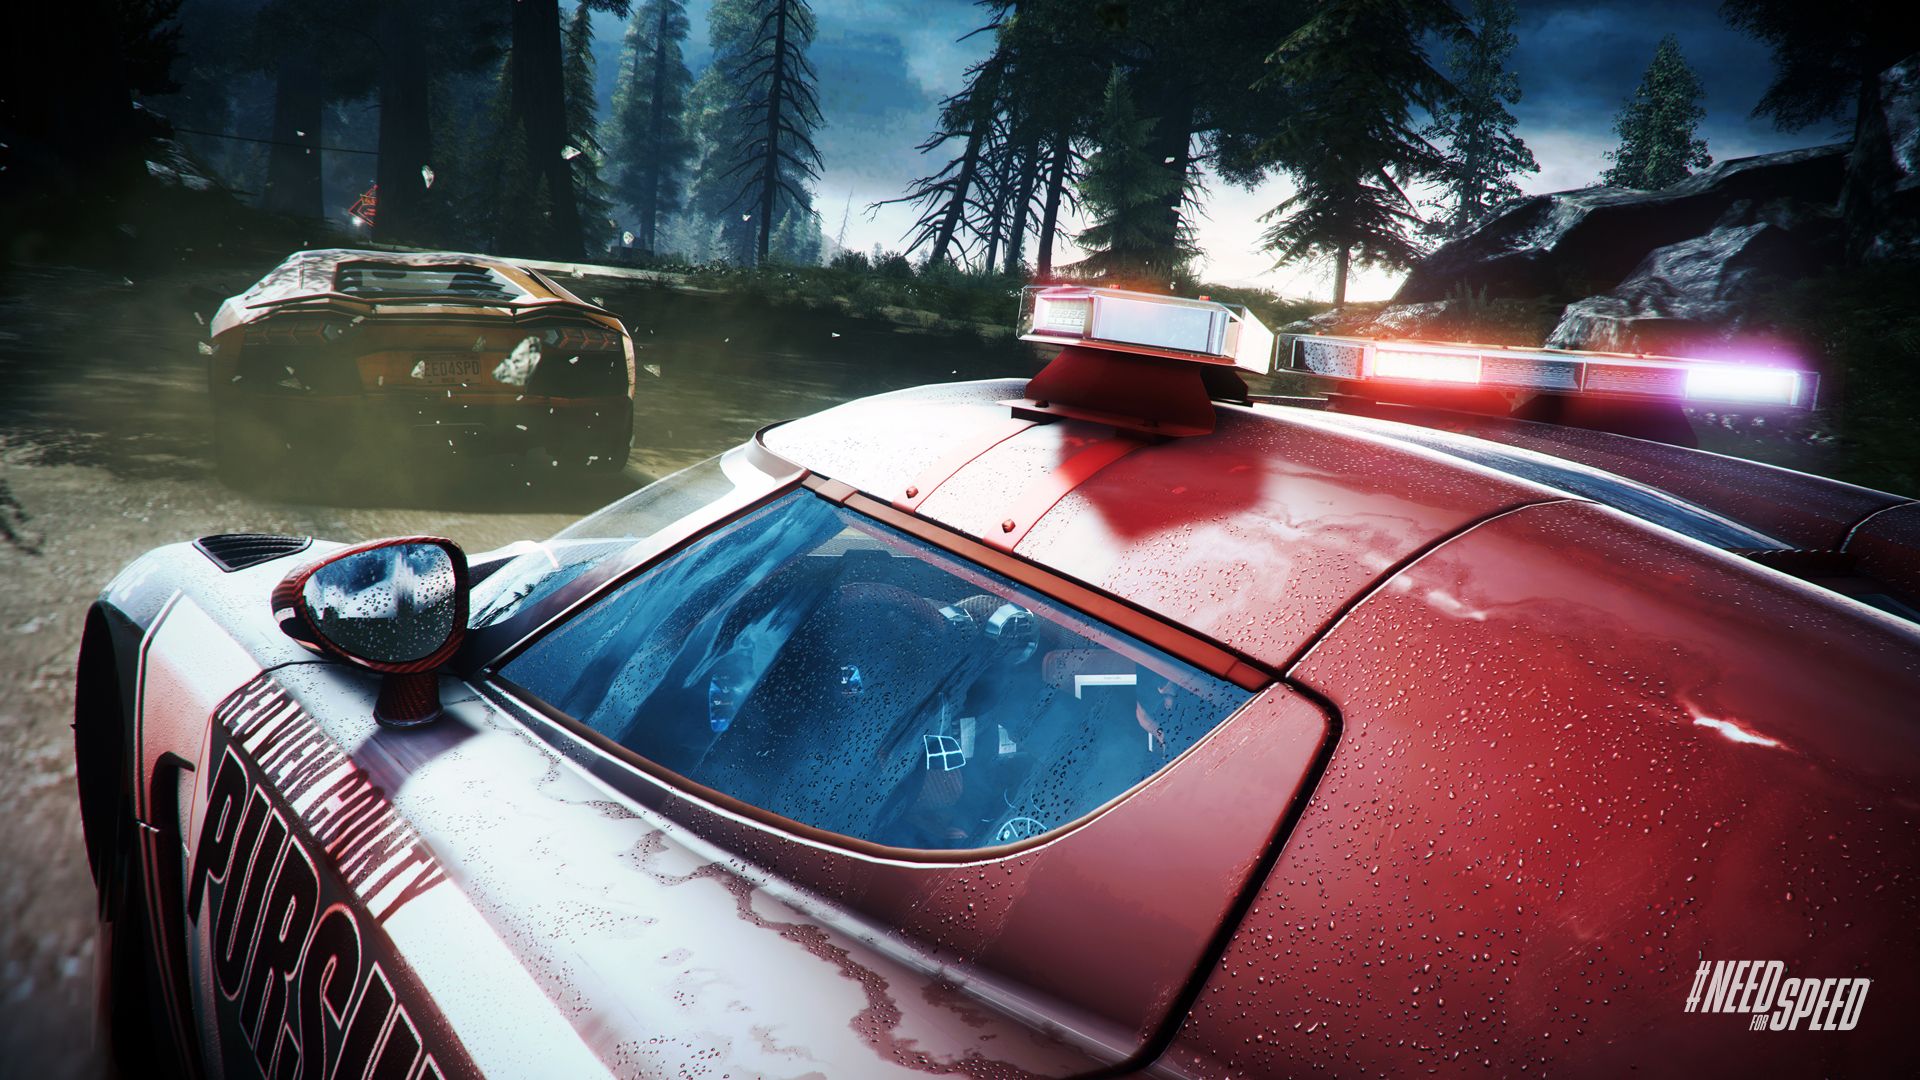 1920x1080 Need For Speed Rivals The Car Accident Wallpaper And Image Wallpaper Picture Photos